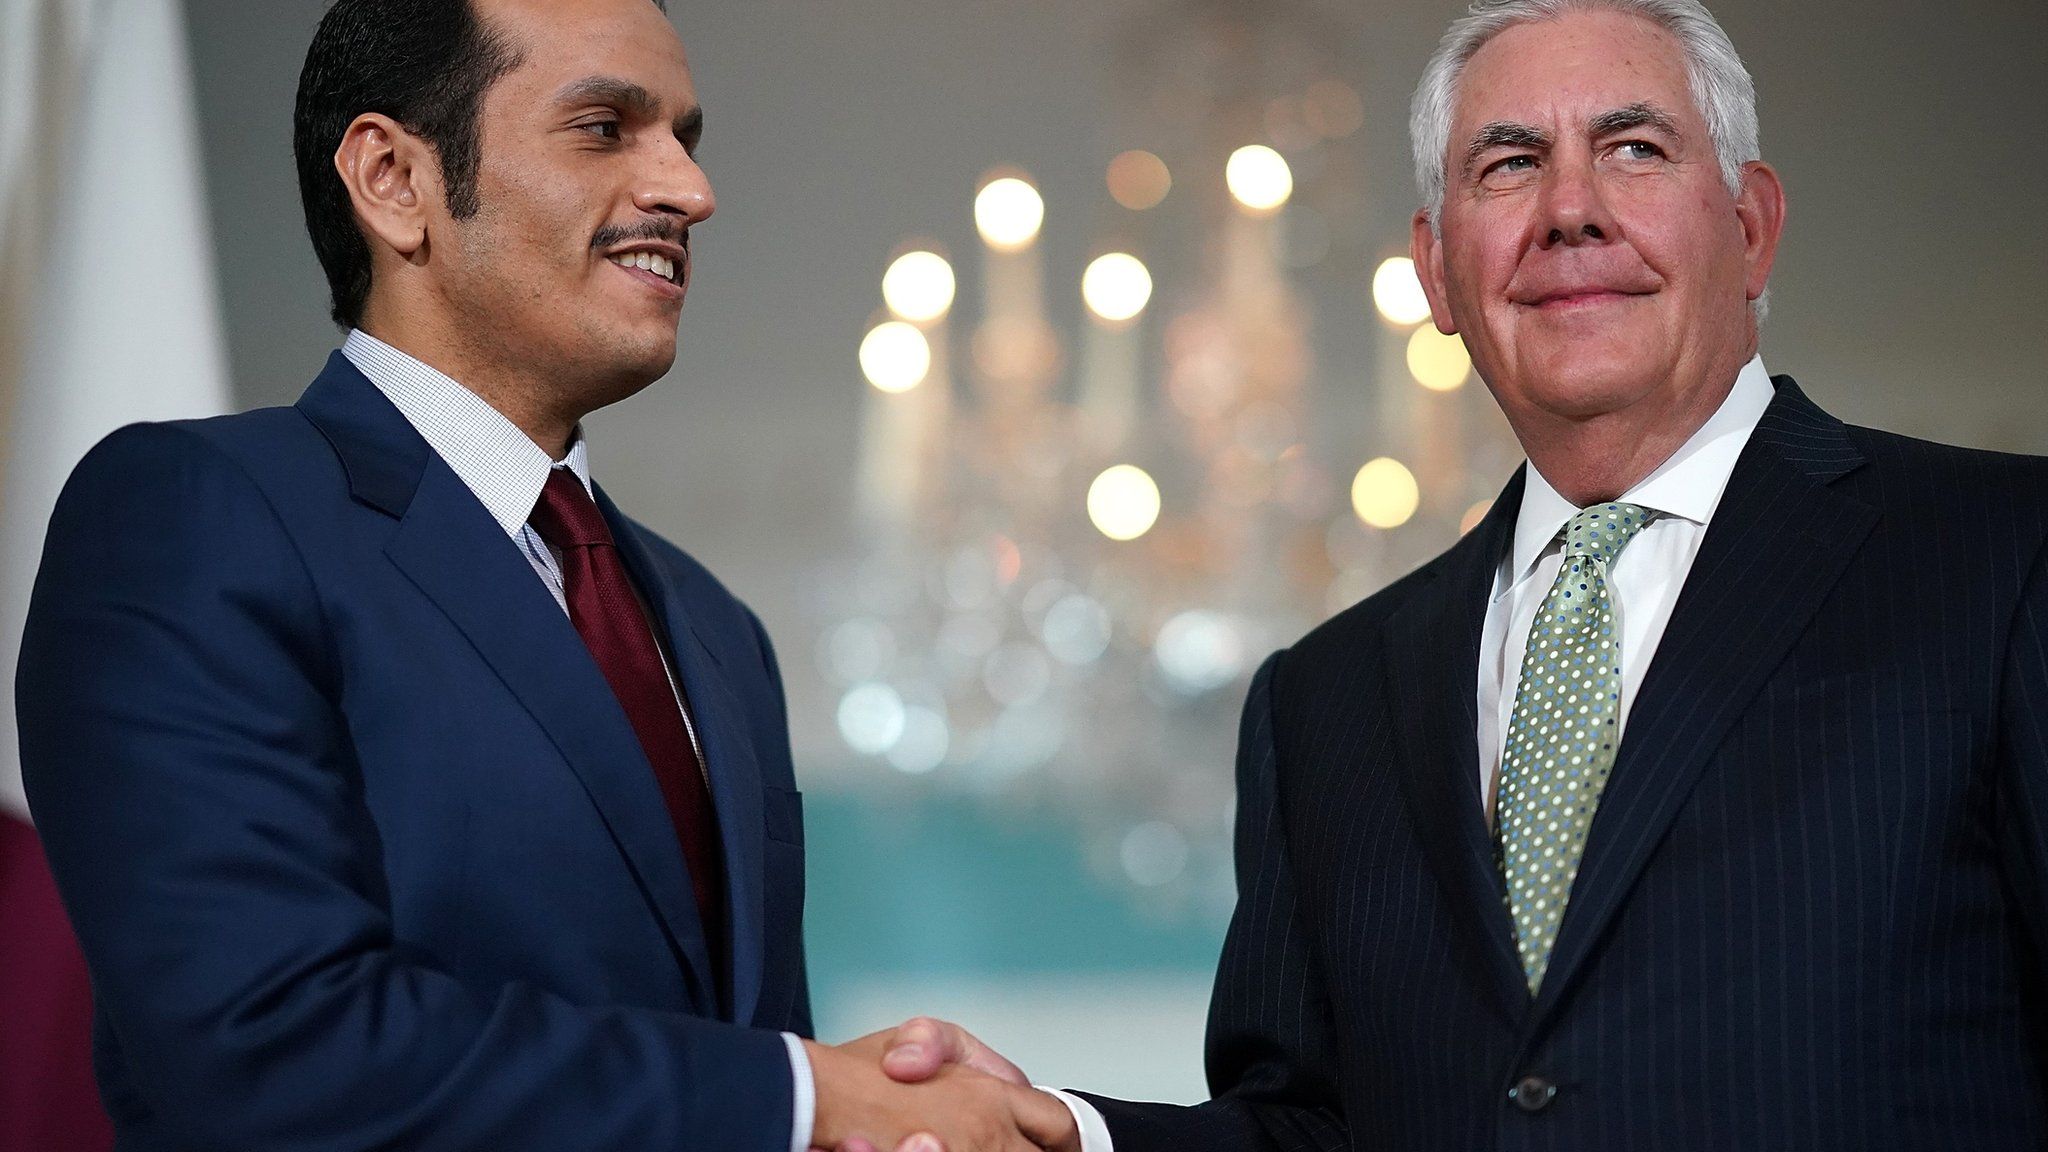 Qatari Foreign Minister Sheikh Mohammed Bin Abdul Rahman Al Thani shakes hands with US Secretary of State Rex Tillerson at the state department in Washington on 27 June 2017